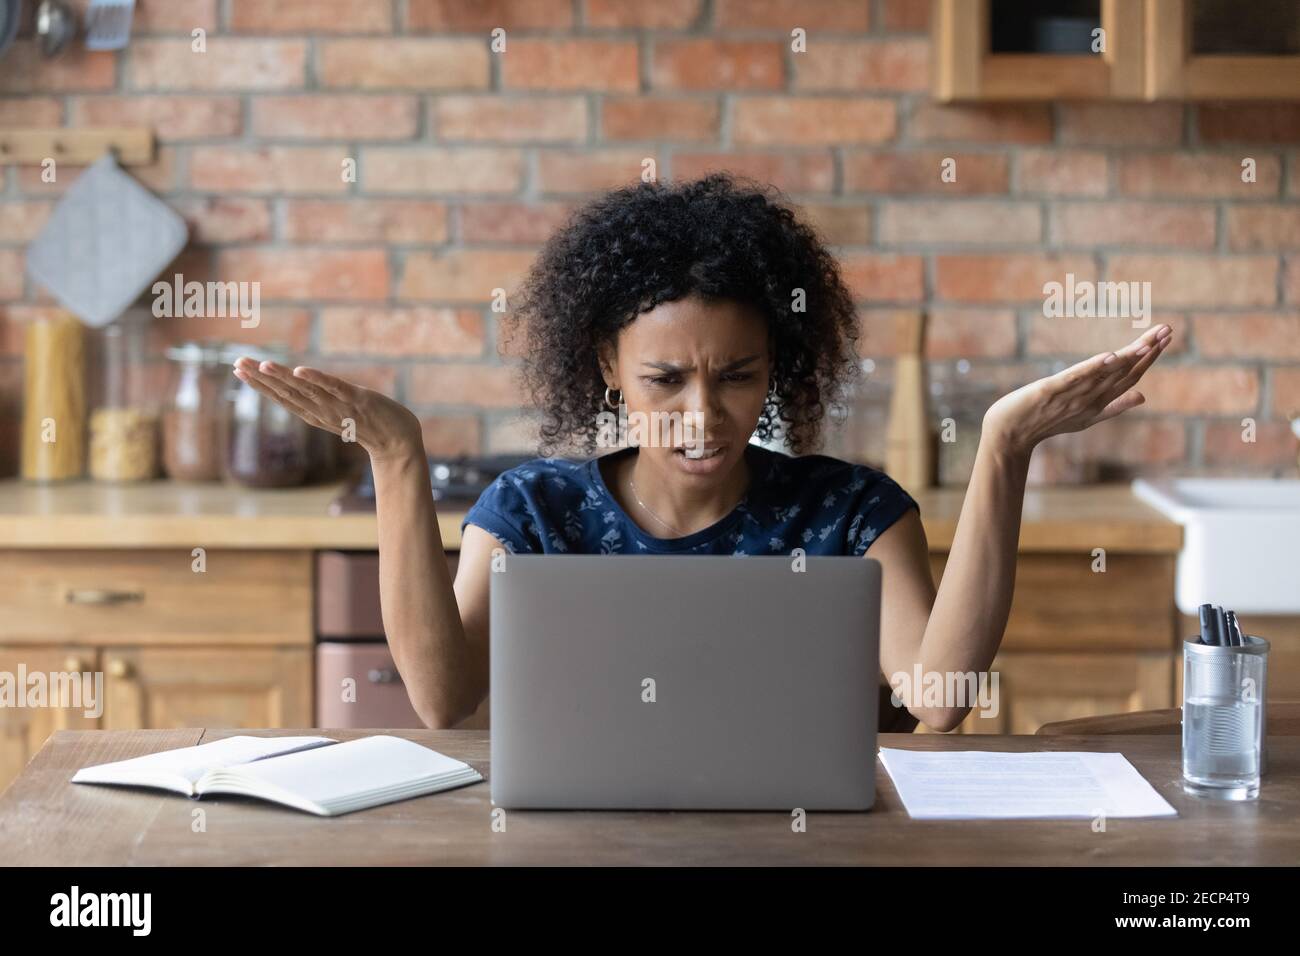 Close up unhappy irritated African American woman using laptop Stock Photo